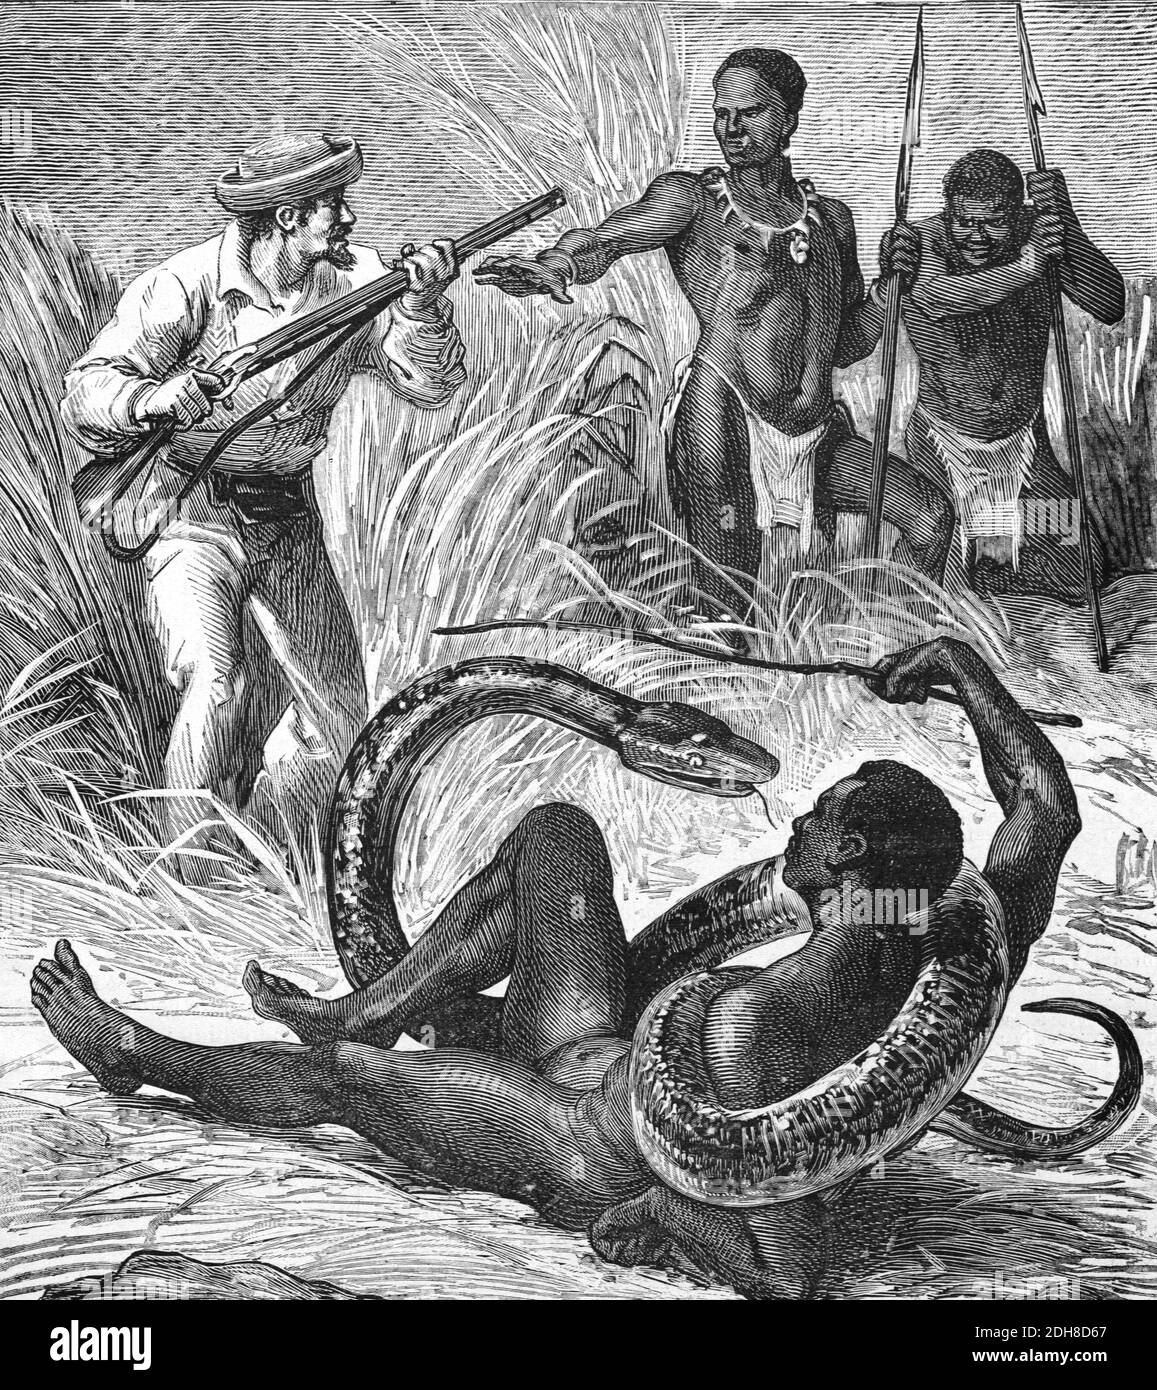 African Man Attacked by Giant Snake & Suffocated by Constriction Africa (Engr 1880) Vintage Illustration or Engraving Stock Photo